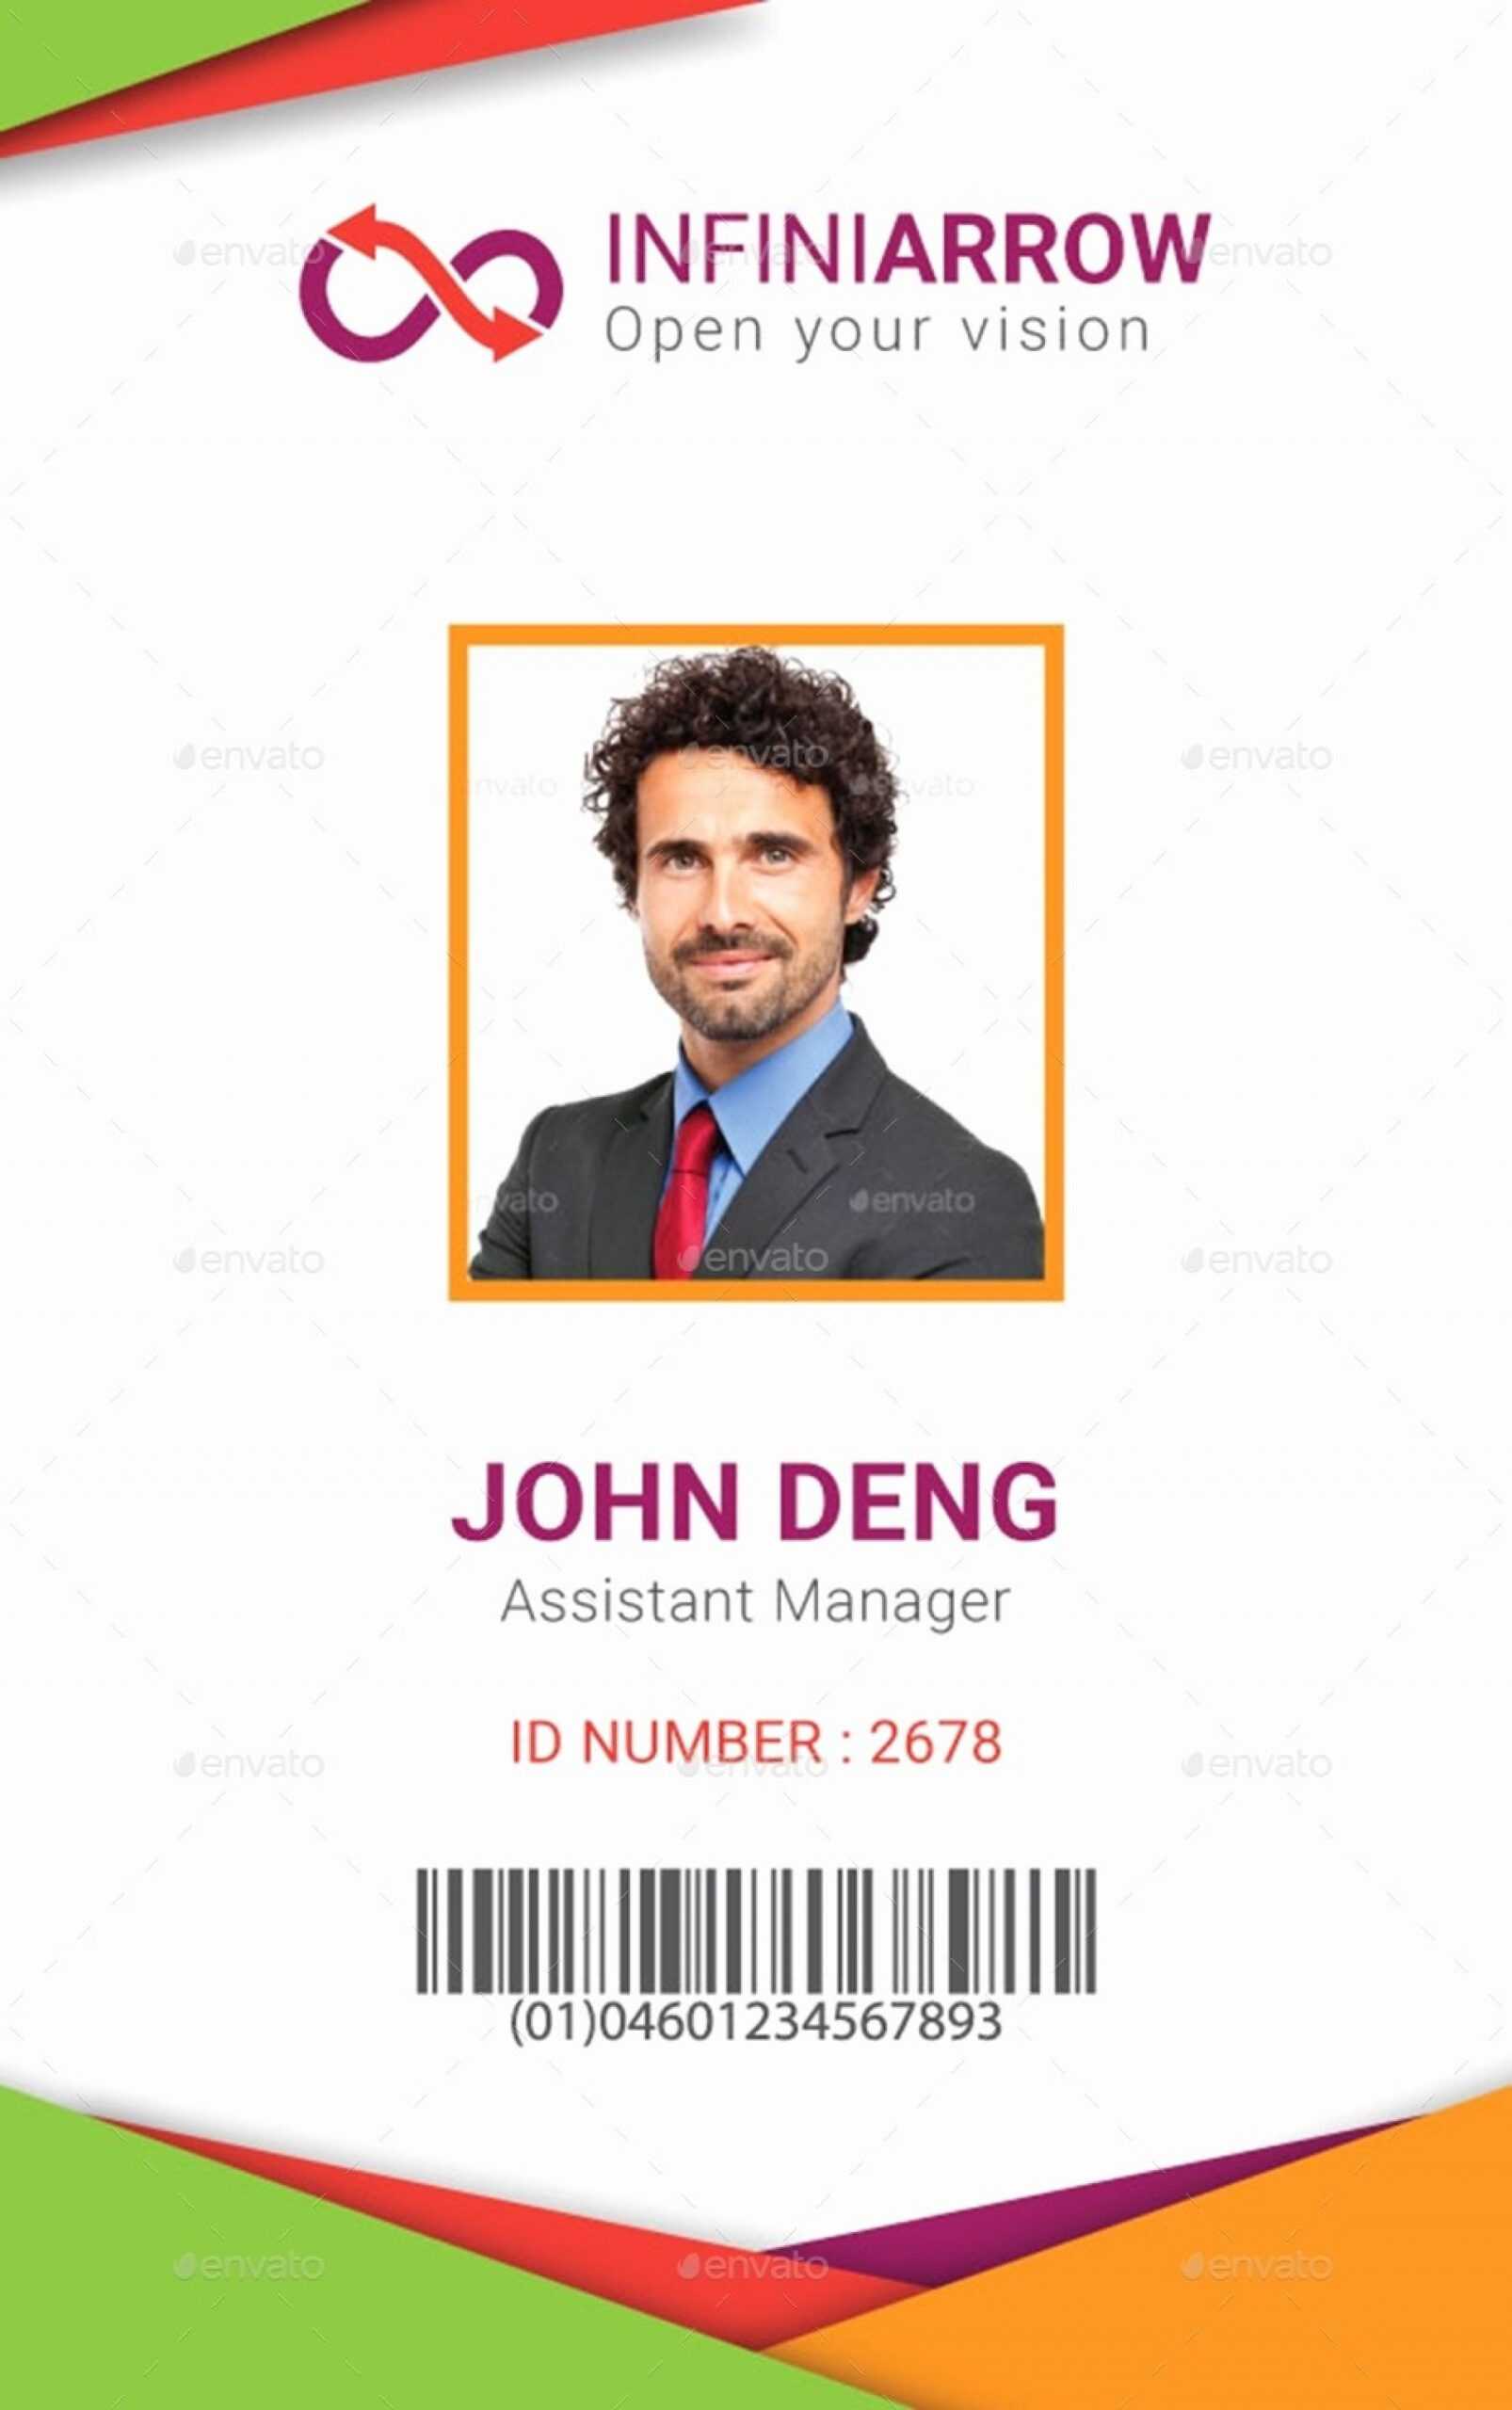 031 Template Ideas Employee Id Card Microsoft Word Free Throughout Media Id Card Templates